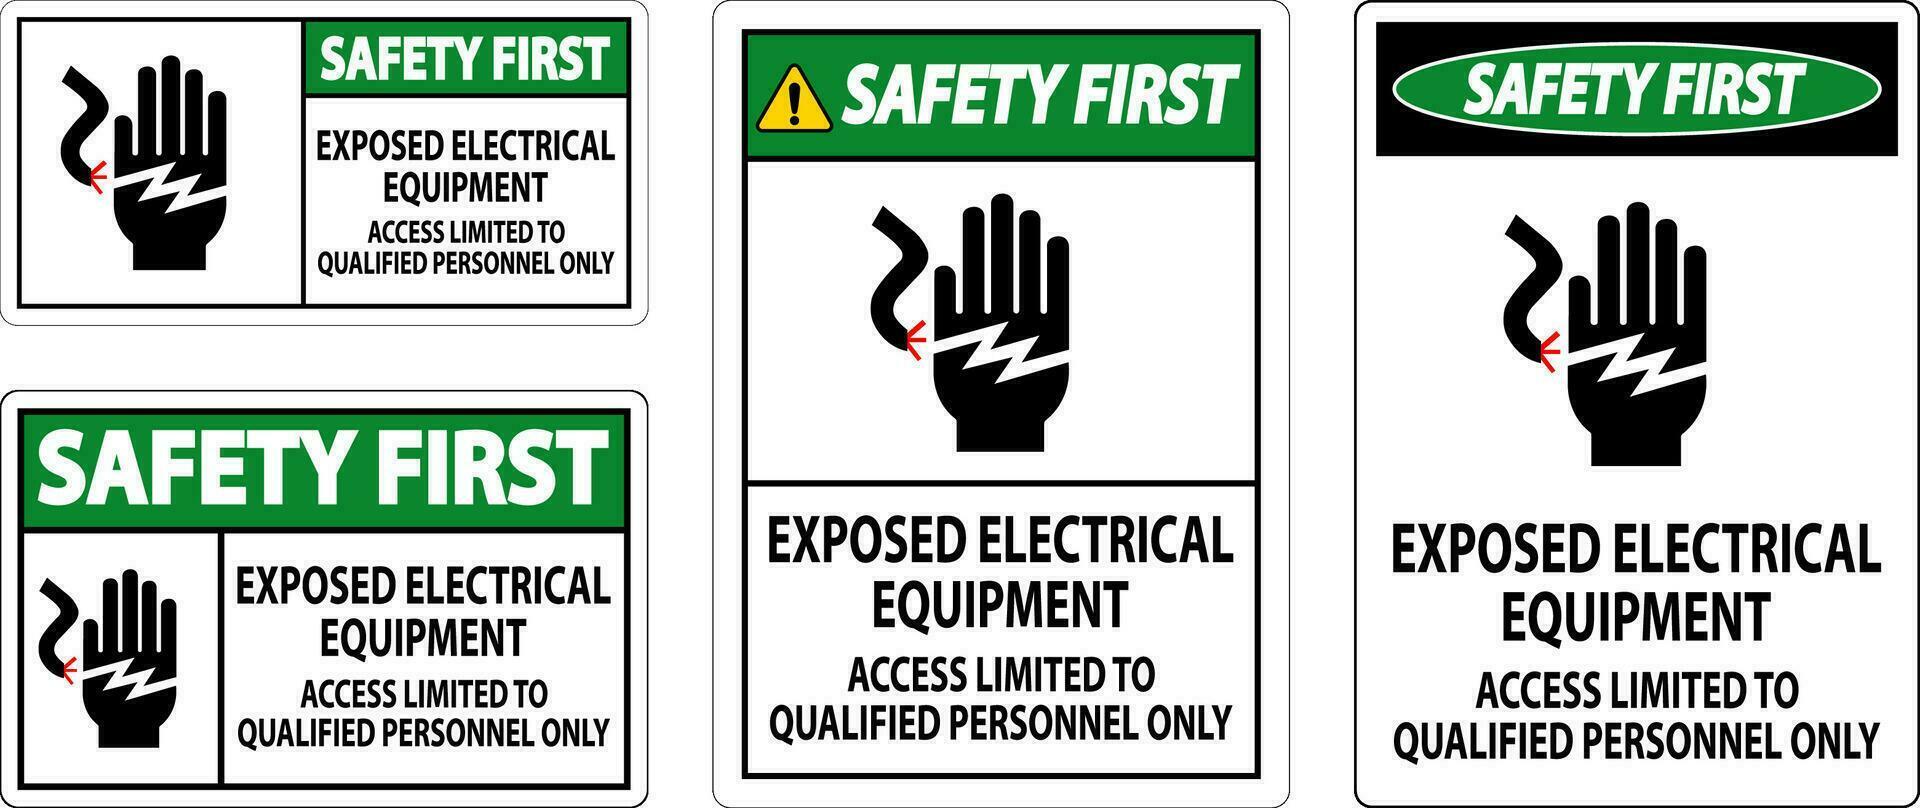 Safety First Sign Exposed Electrical Equipment, Access Limited To Qualified Personnel Only vector